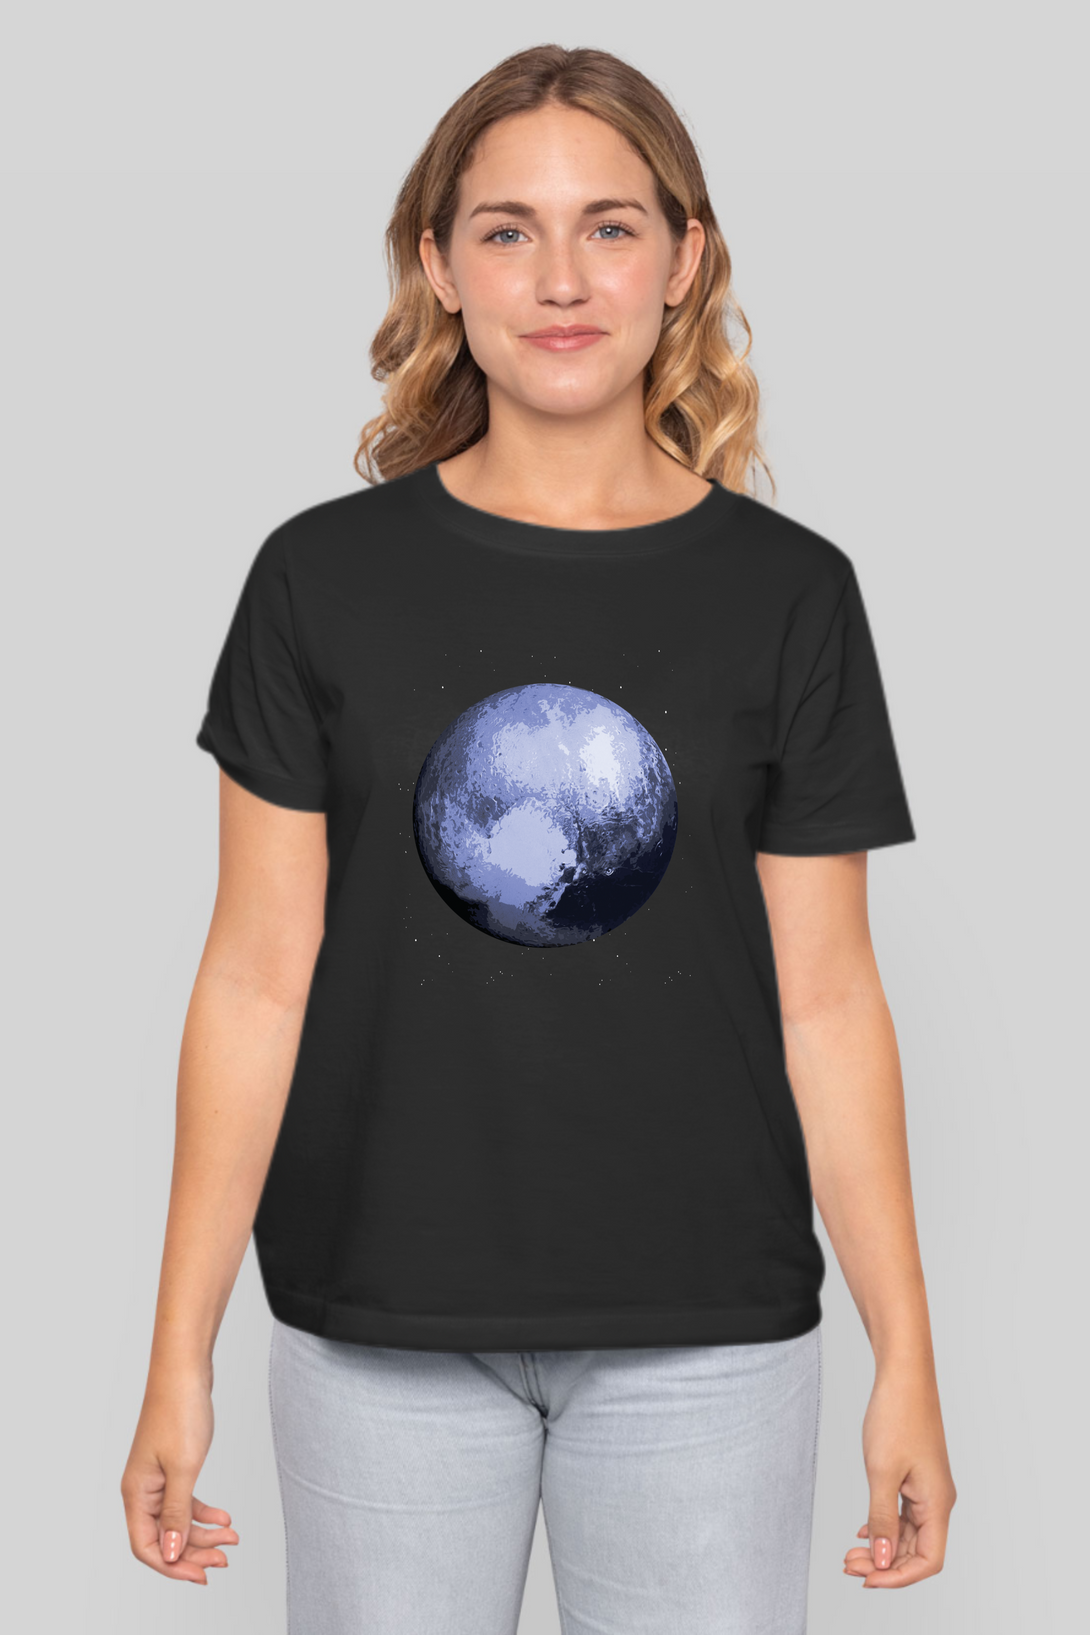 Blue Planet Printed T-Shirt For Women - WowWaves - 6